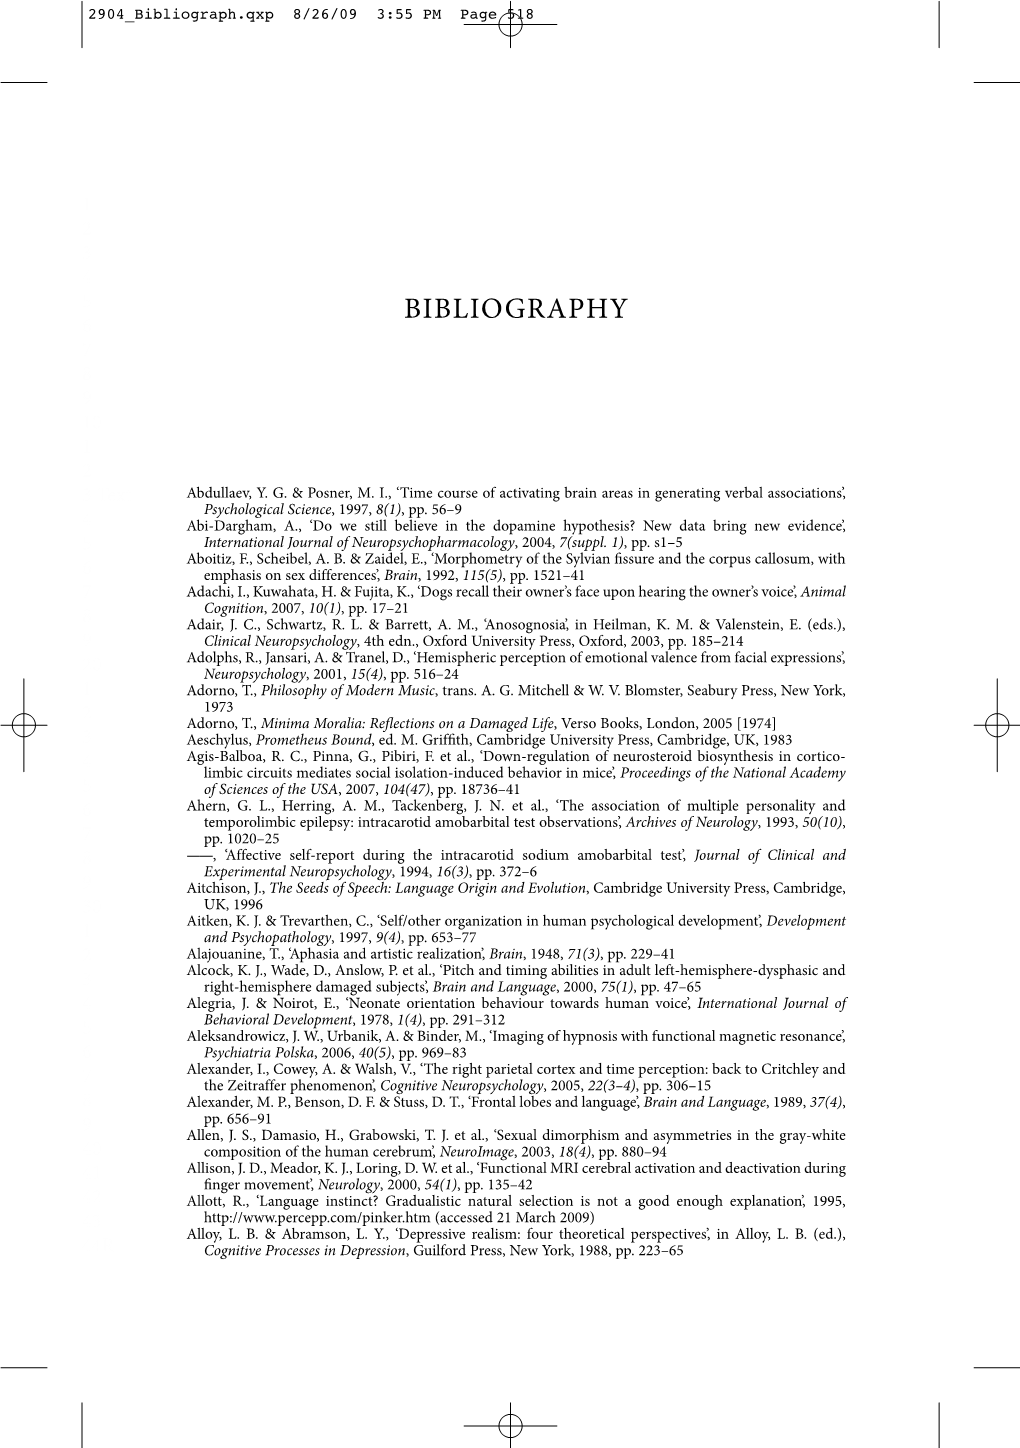 Download Bibliography